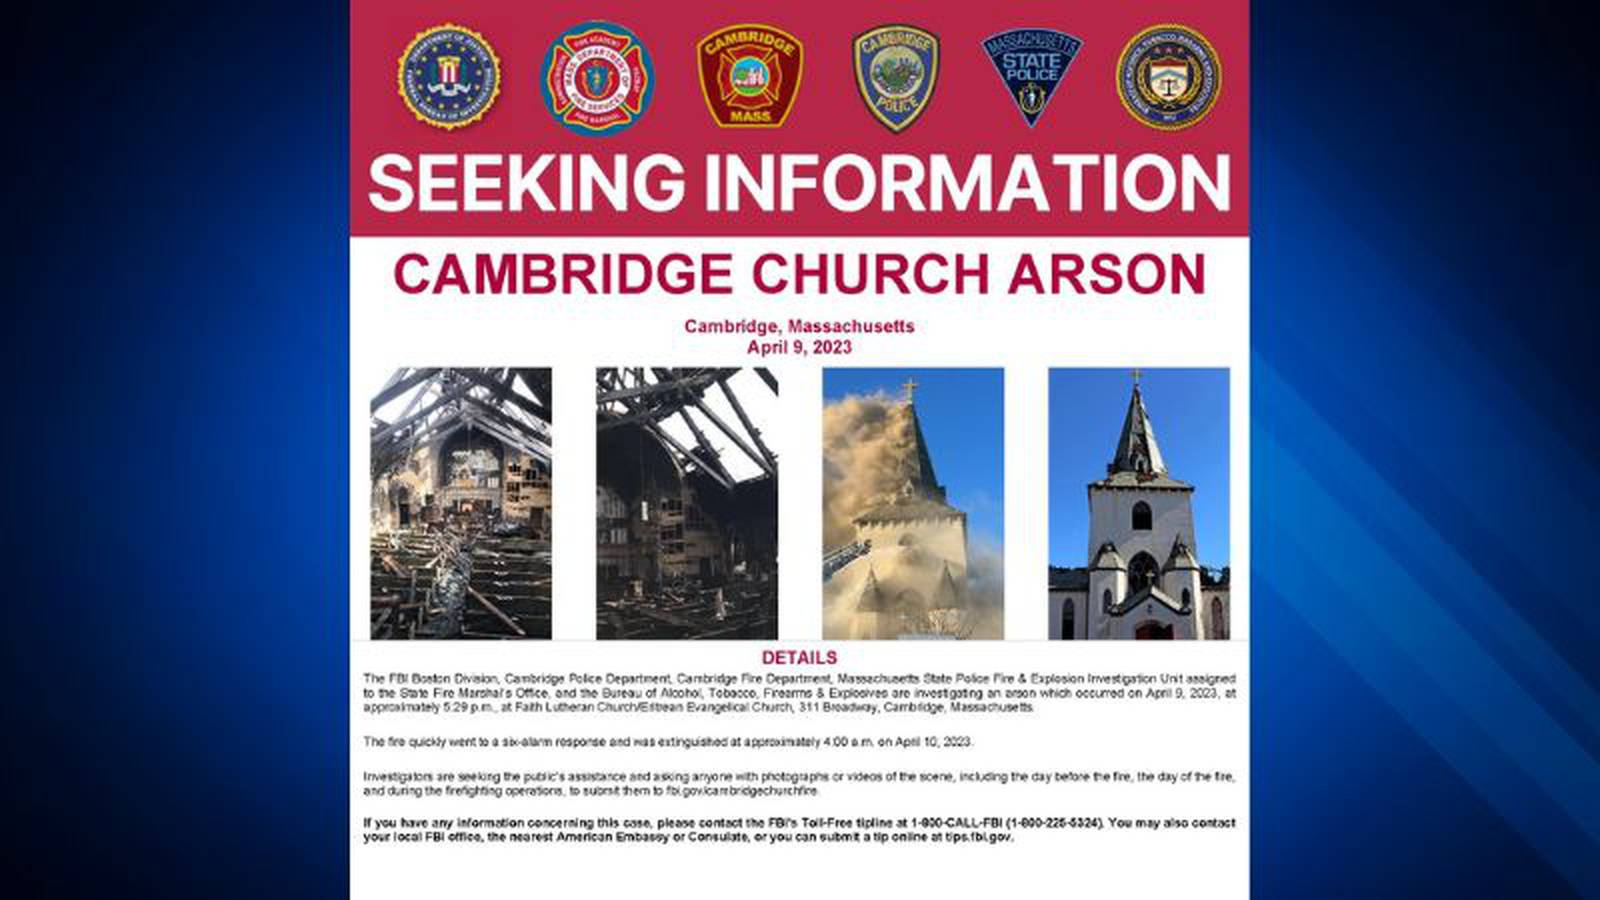 Fire That Tore Through Cambridge Church On Easter Sunday Now Being Investigated As Arson Fbi 6528